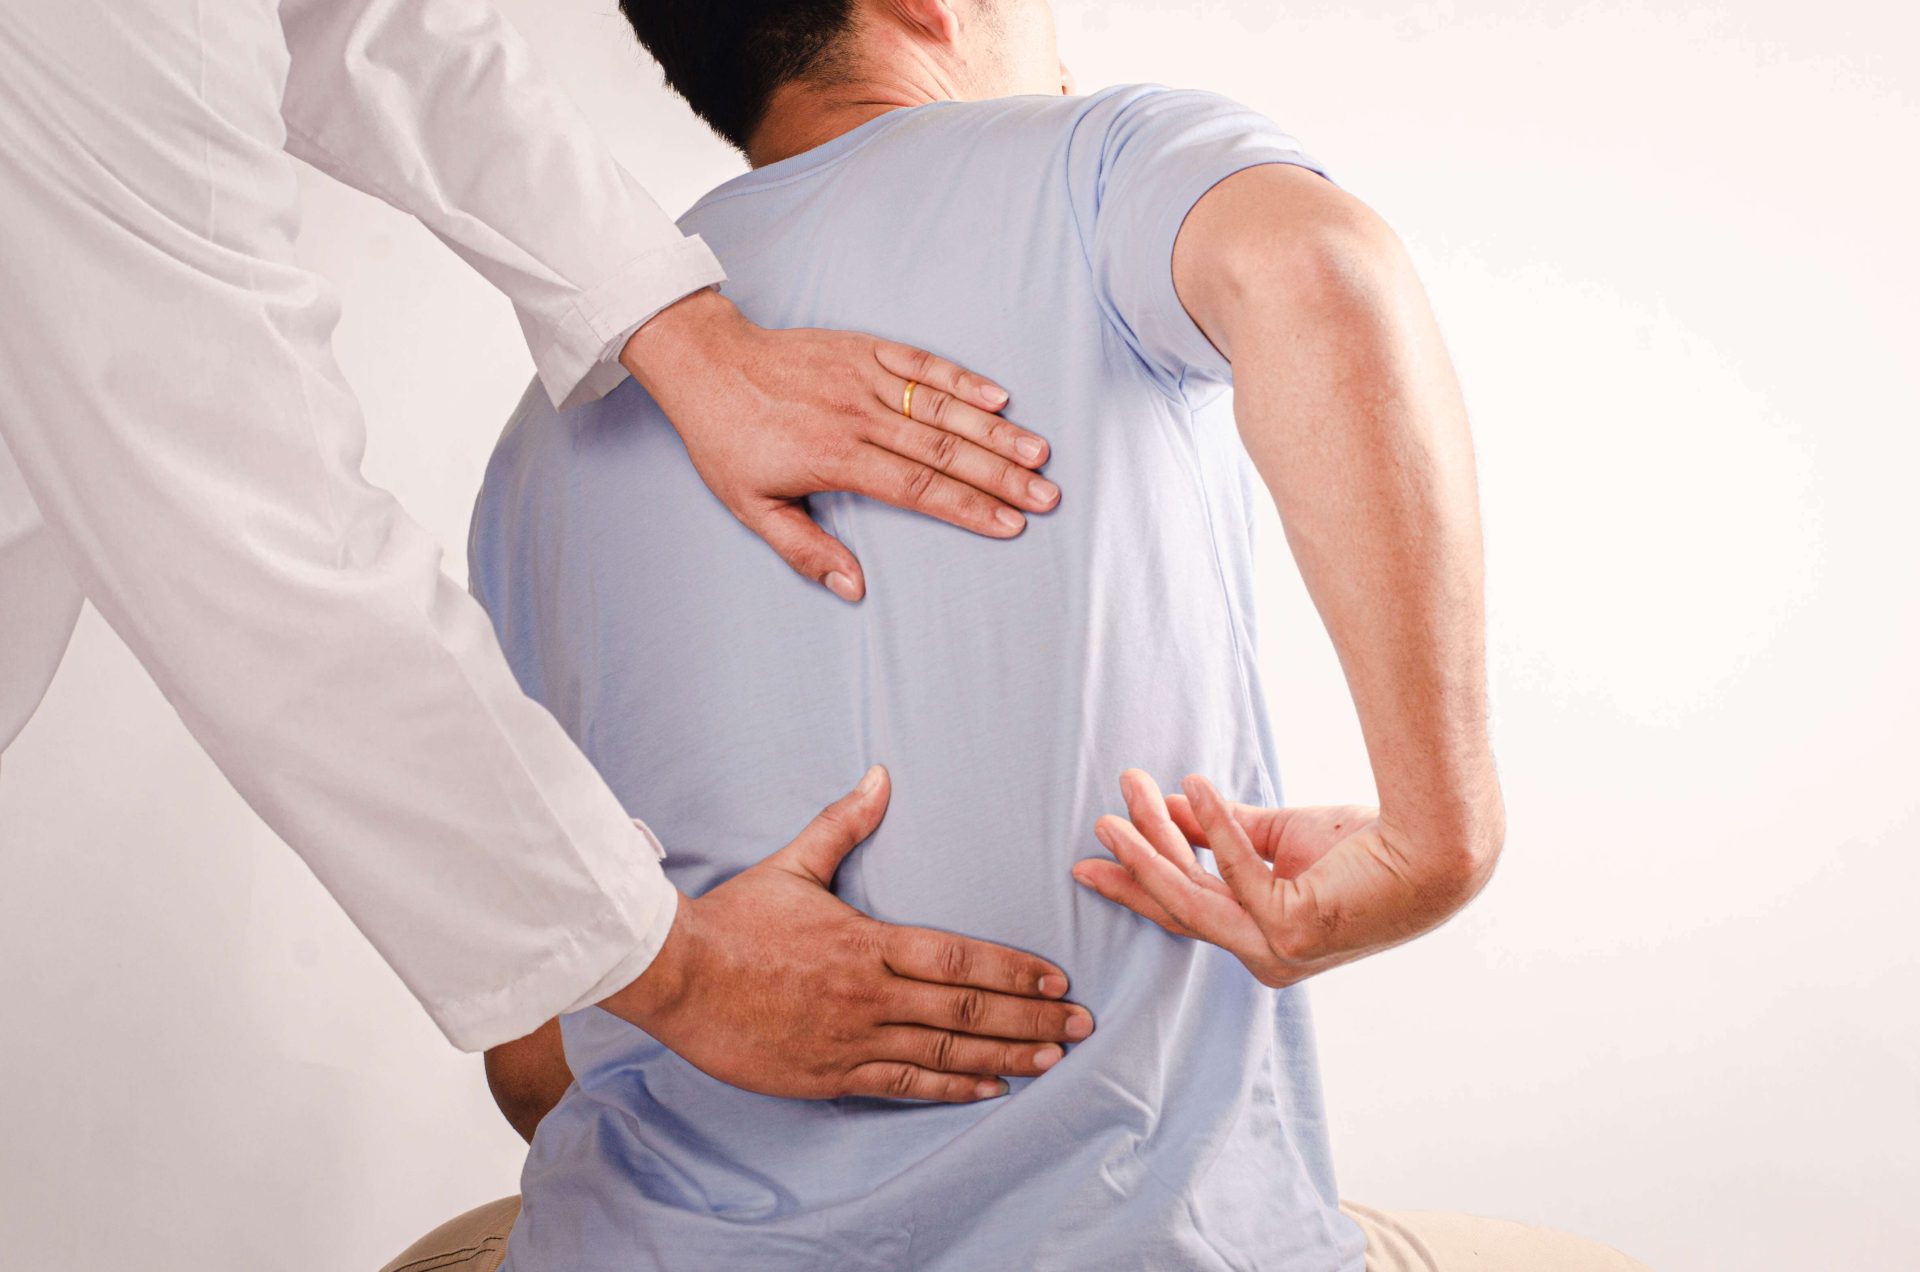 Dealing with low back pain? Try osteopathy